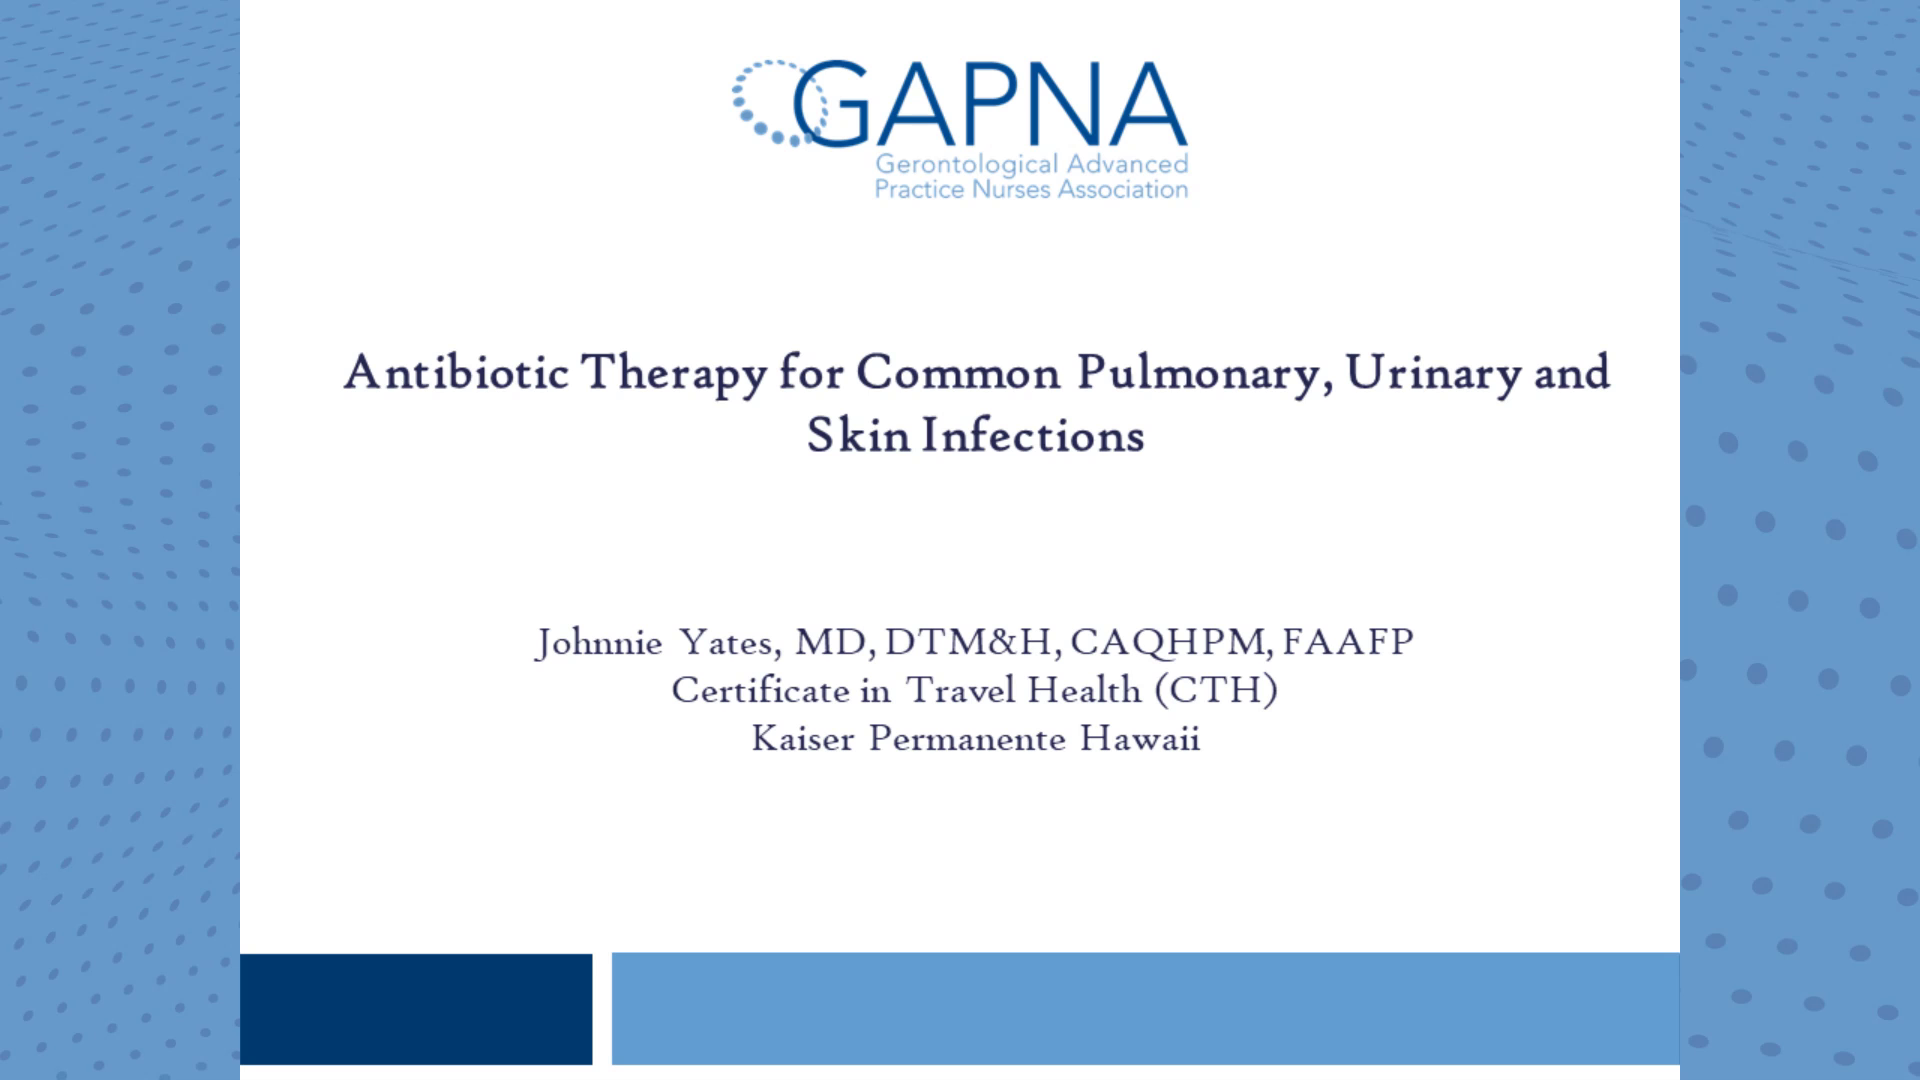 Antibiotic Therapy for Common Pulmonary, Urinary, and Skin Infections